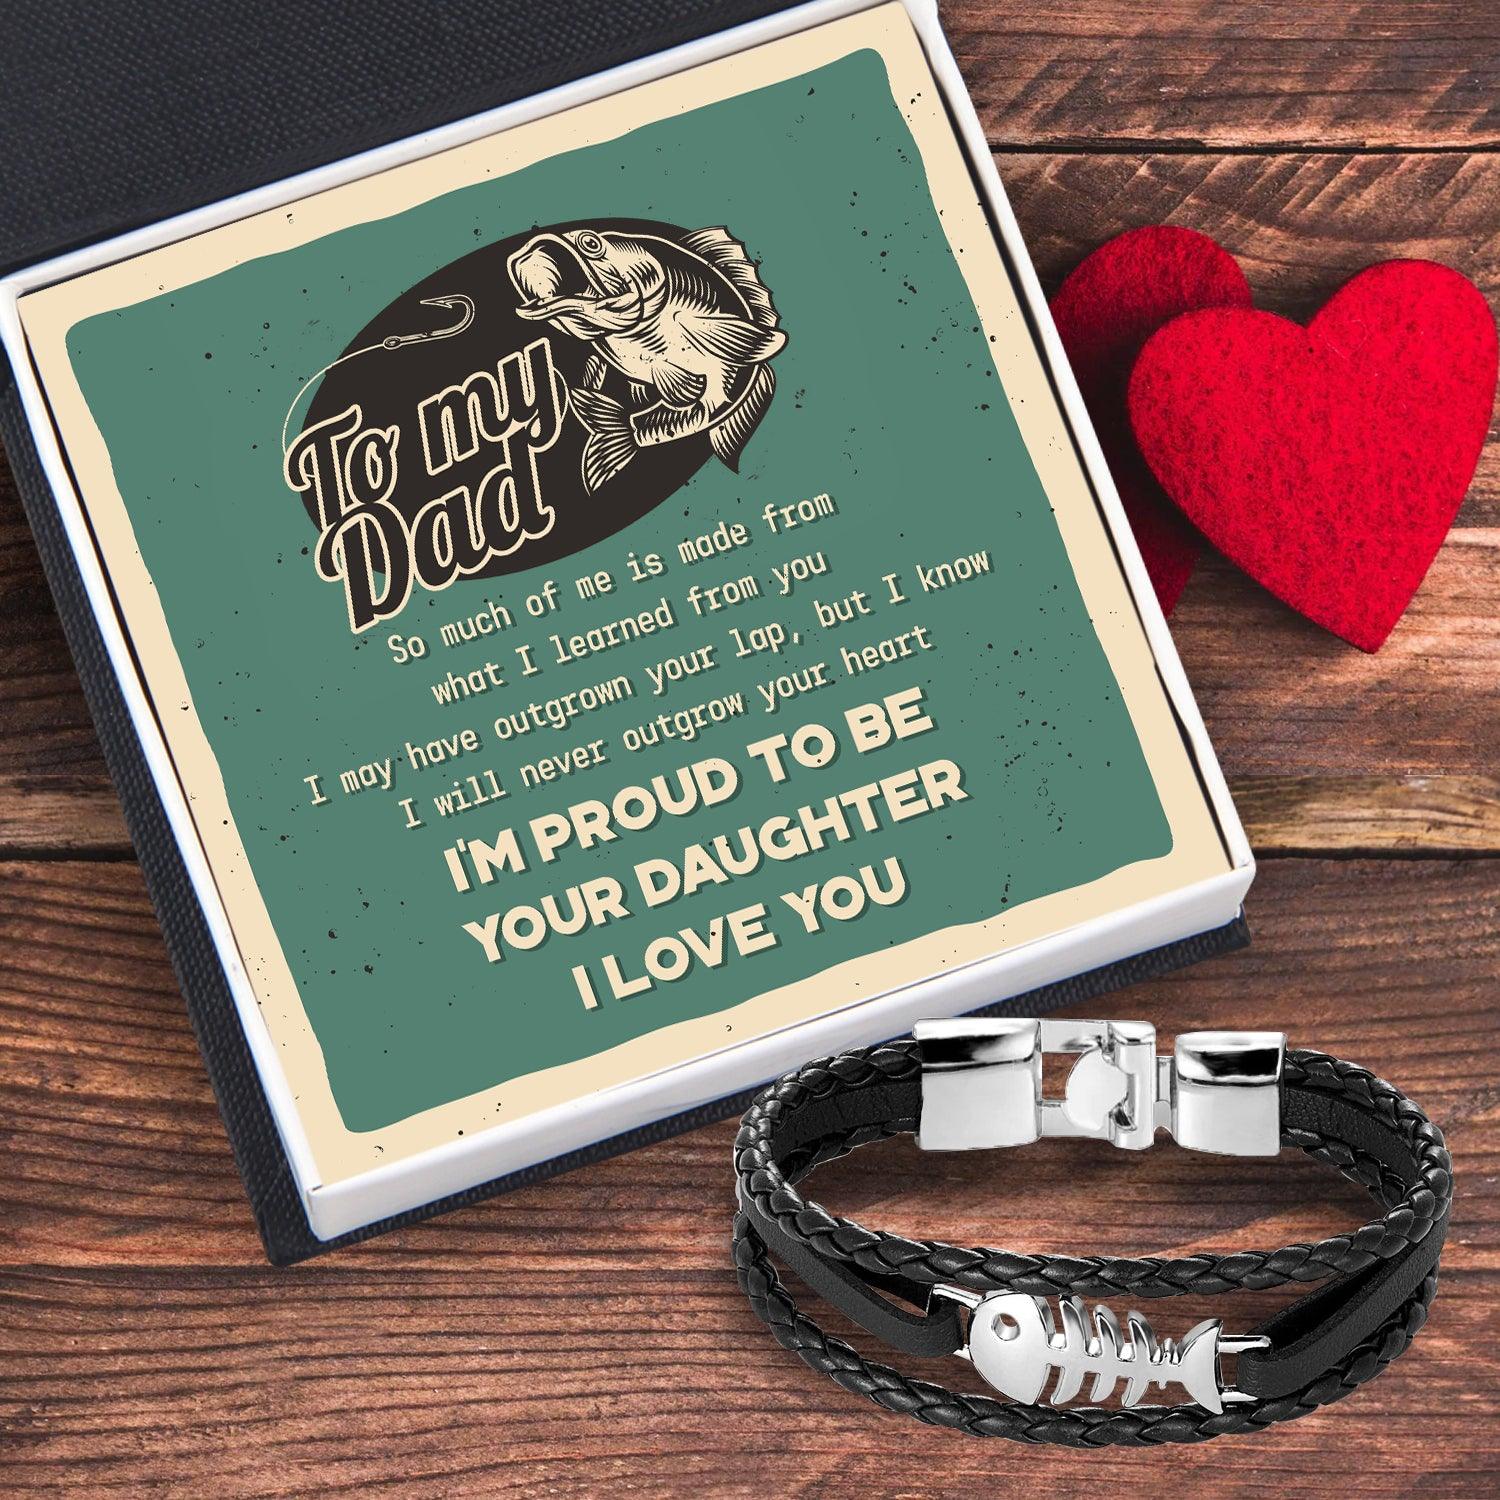 Fish Leather Bracelet - Fishing - To My Dad - From Daughter - I'm Proud To Be Your Daughte - Augbzp18002 - Gifts Holder